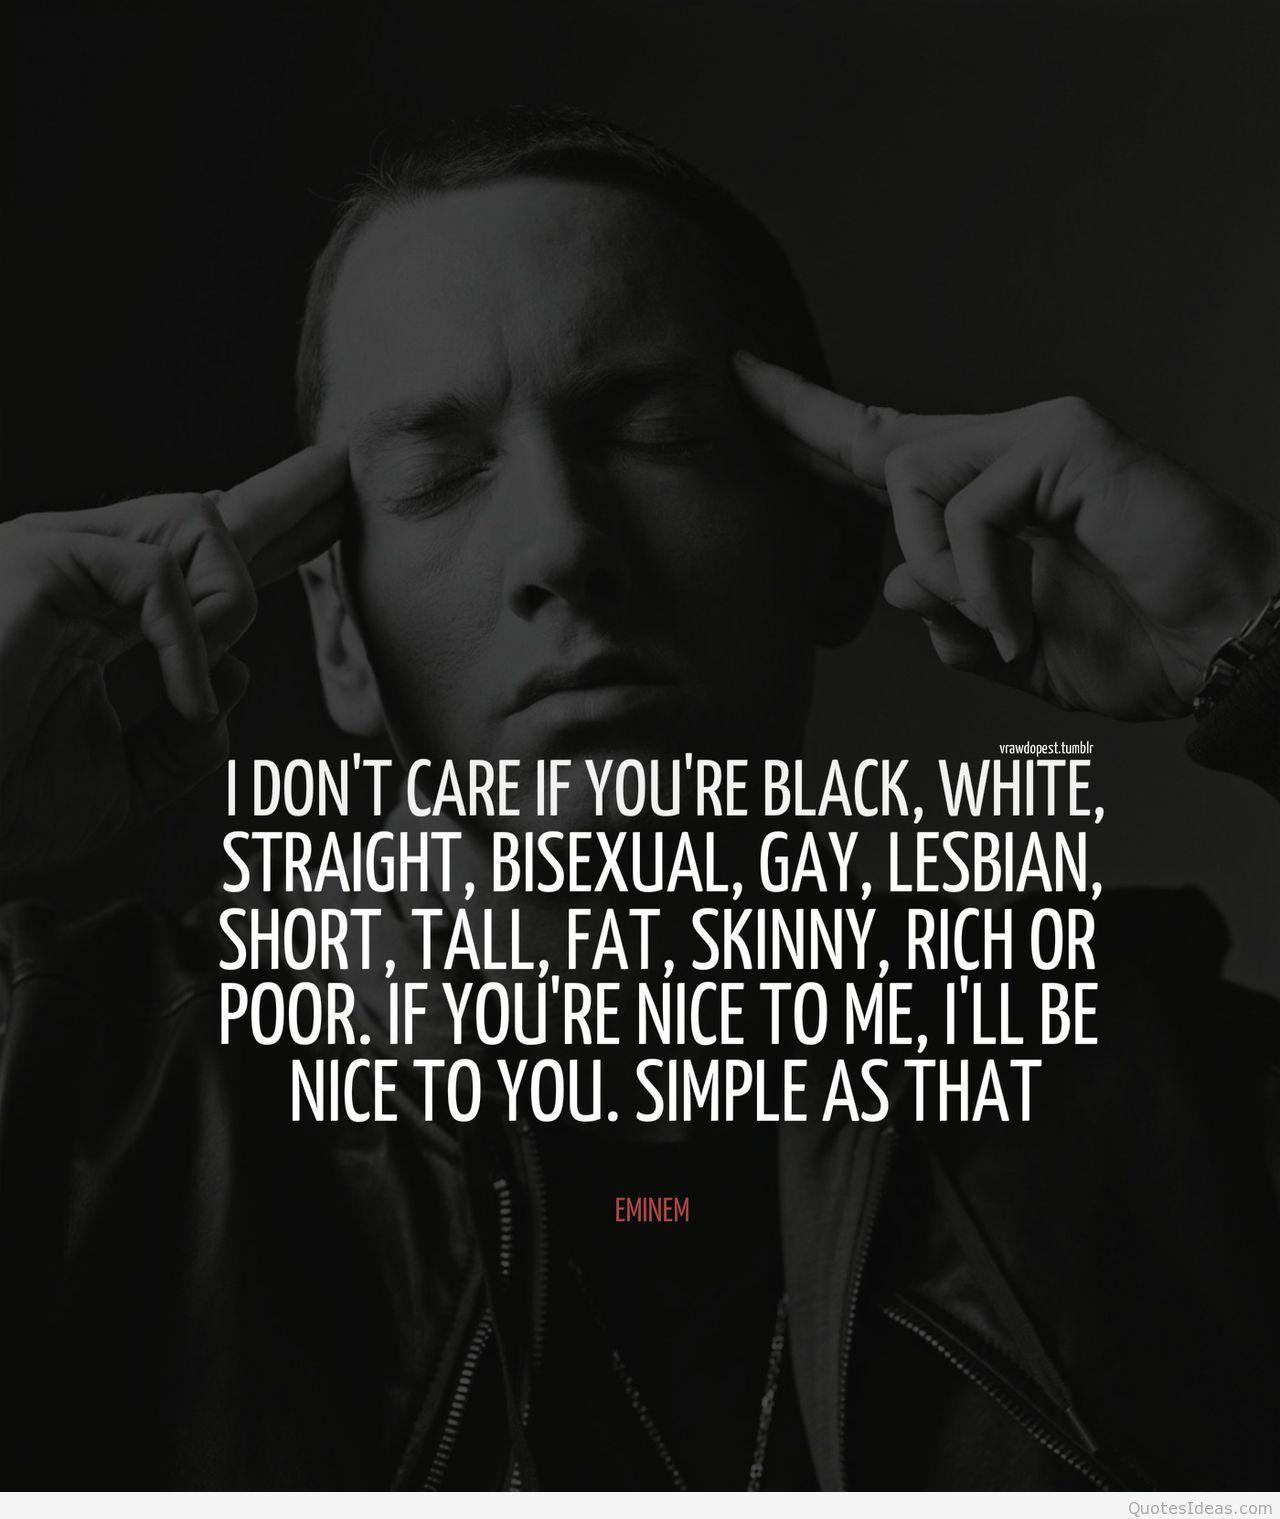 Eminem quotes picture and image hd